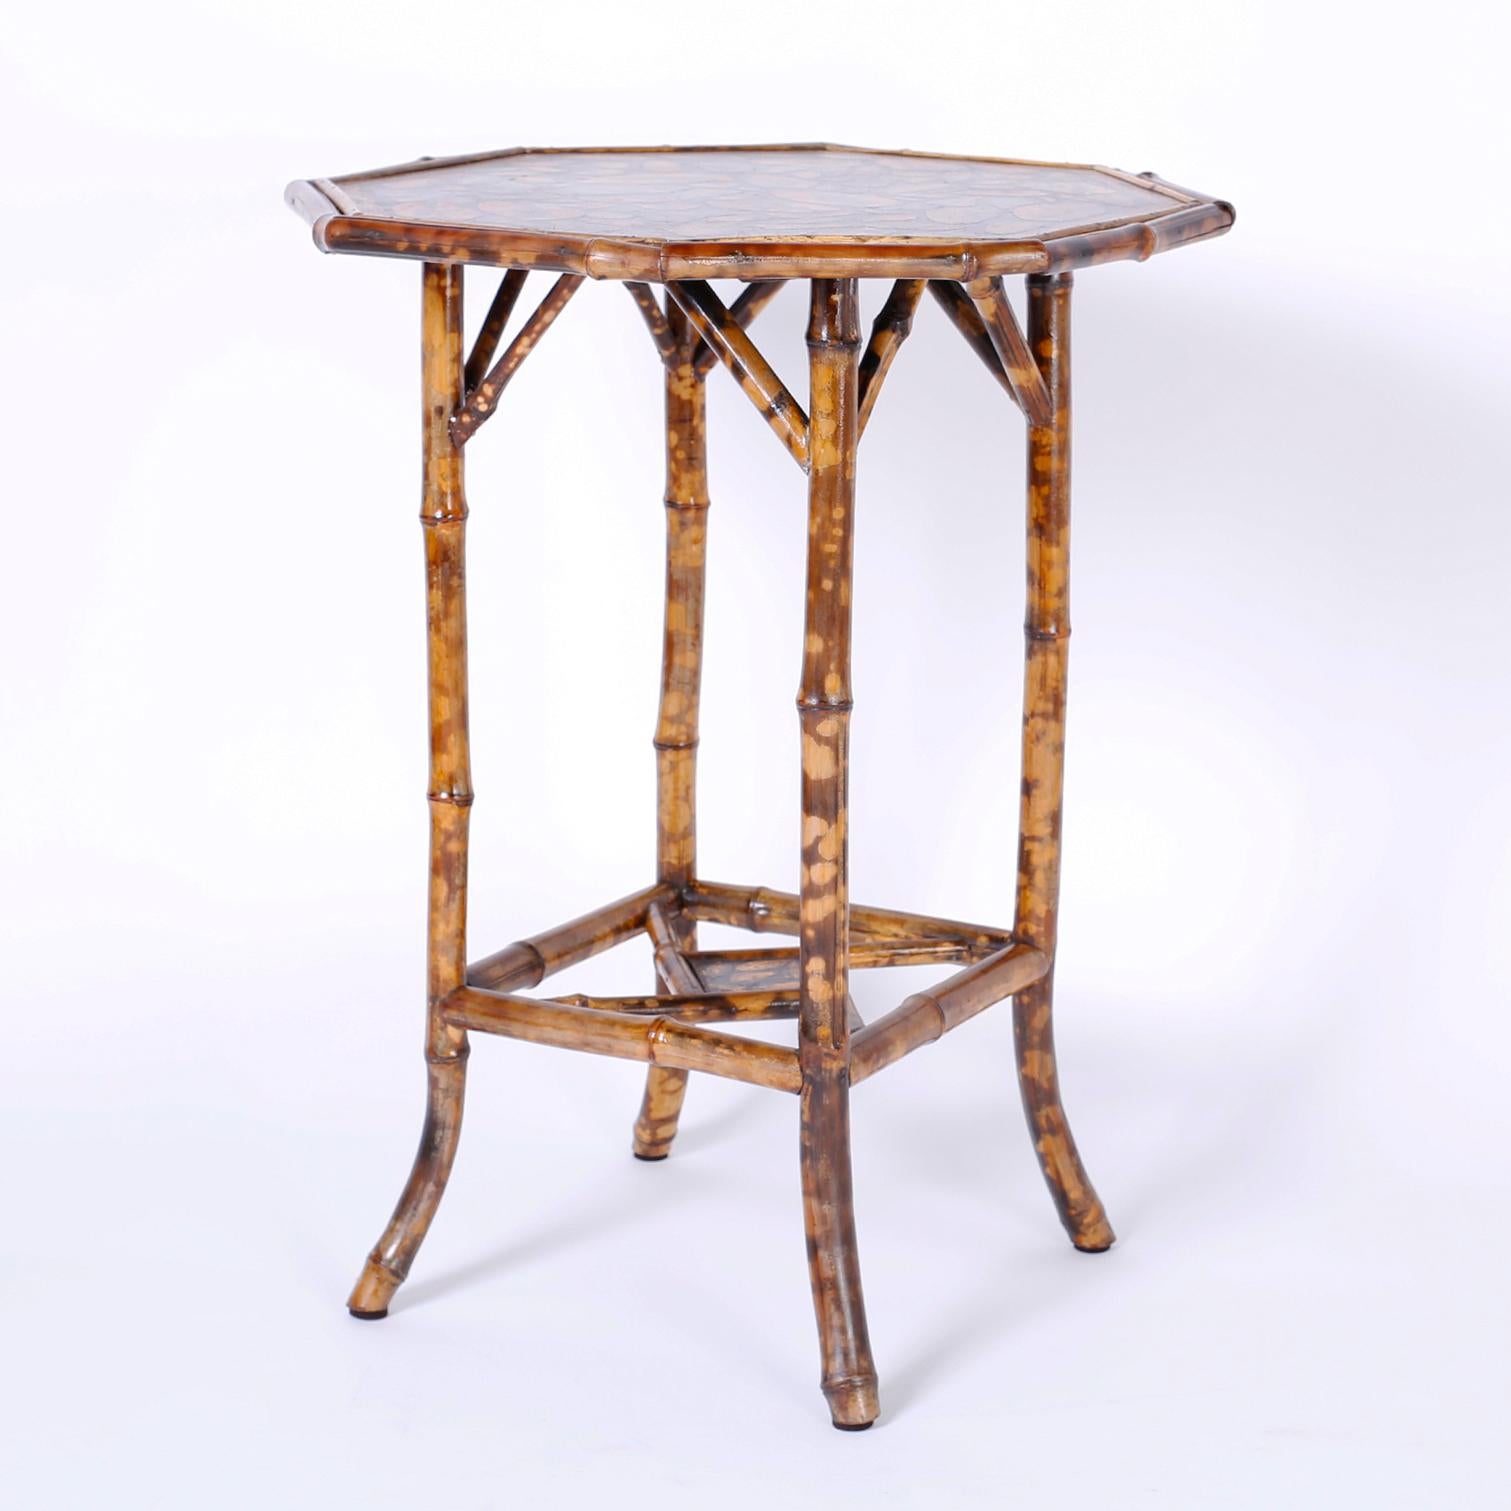 Antique English bamboo occasional table or stand with an octagon top ingeniously decorated with contemporary decoupage seashells.